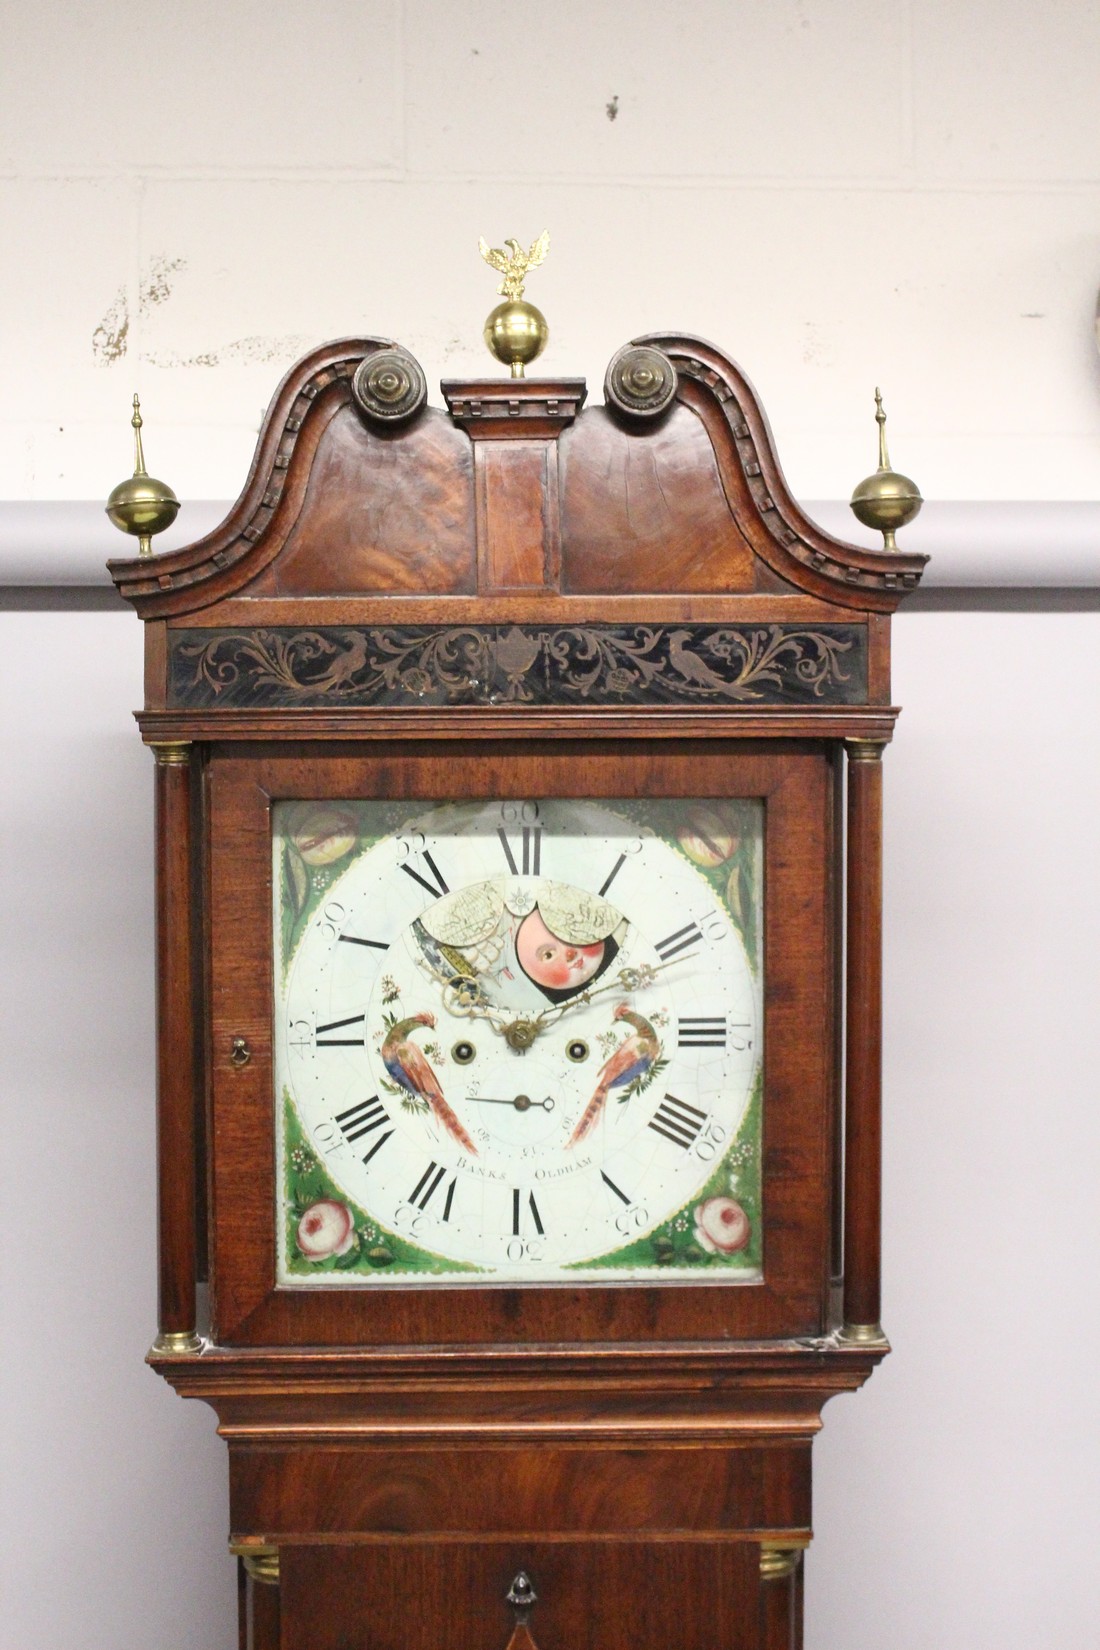 A GEORGE III MAHOGANY LONGCASE CLOCK BY BANKS, OLDHAM, with an eight day moonphase movement, - Image 2 of 9